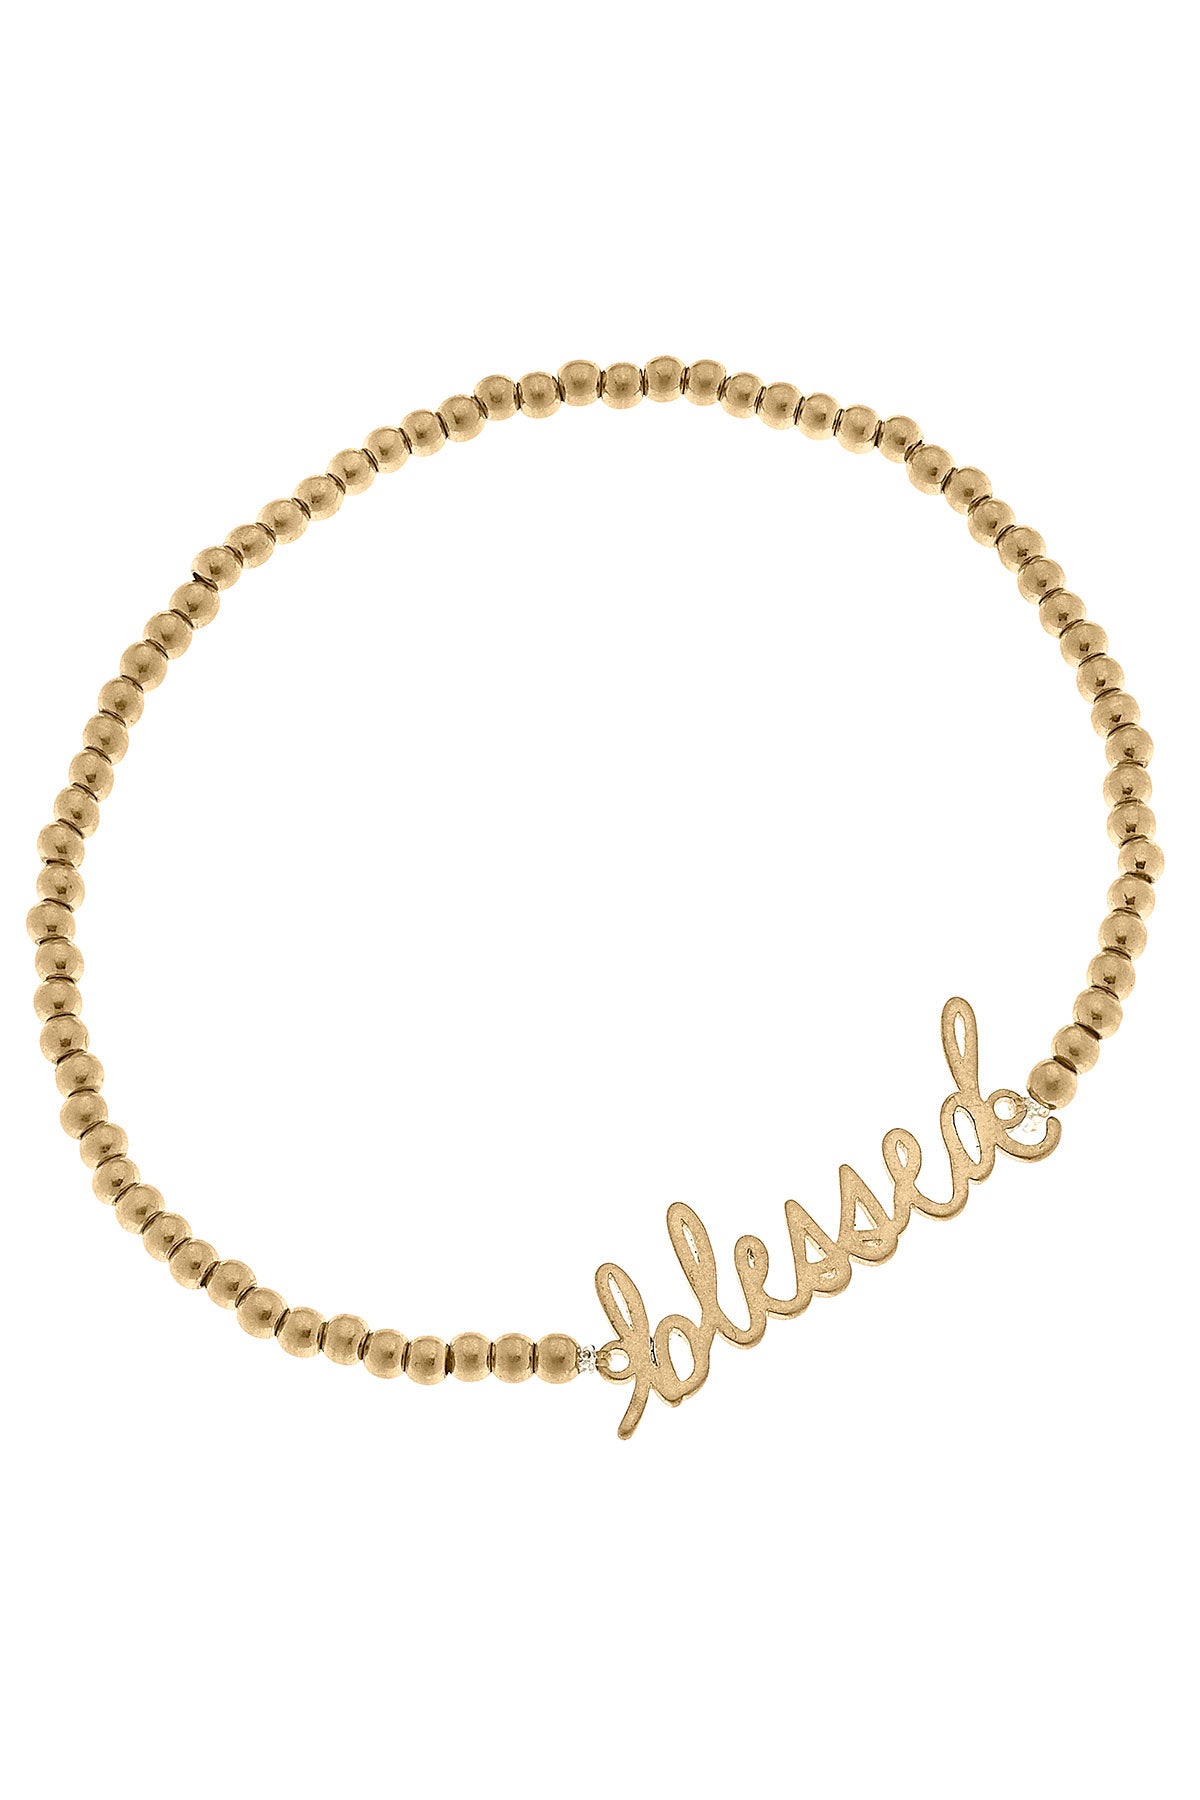 Leah Blessed Ball Bead Stretch Bracelet in Worn Gold by CANVAS